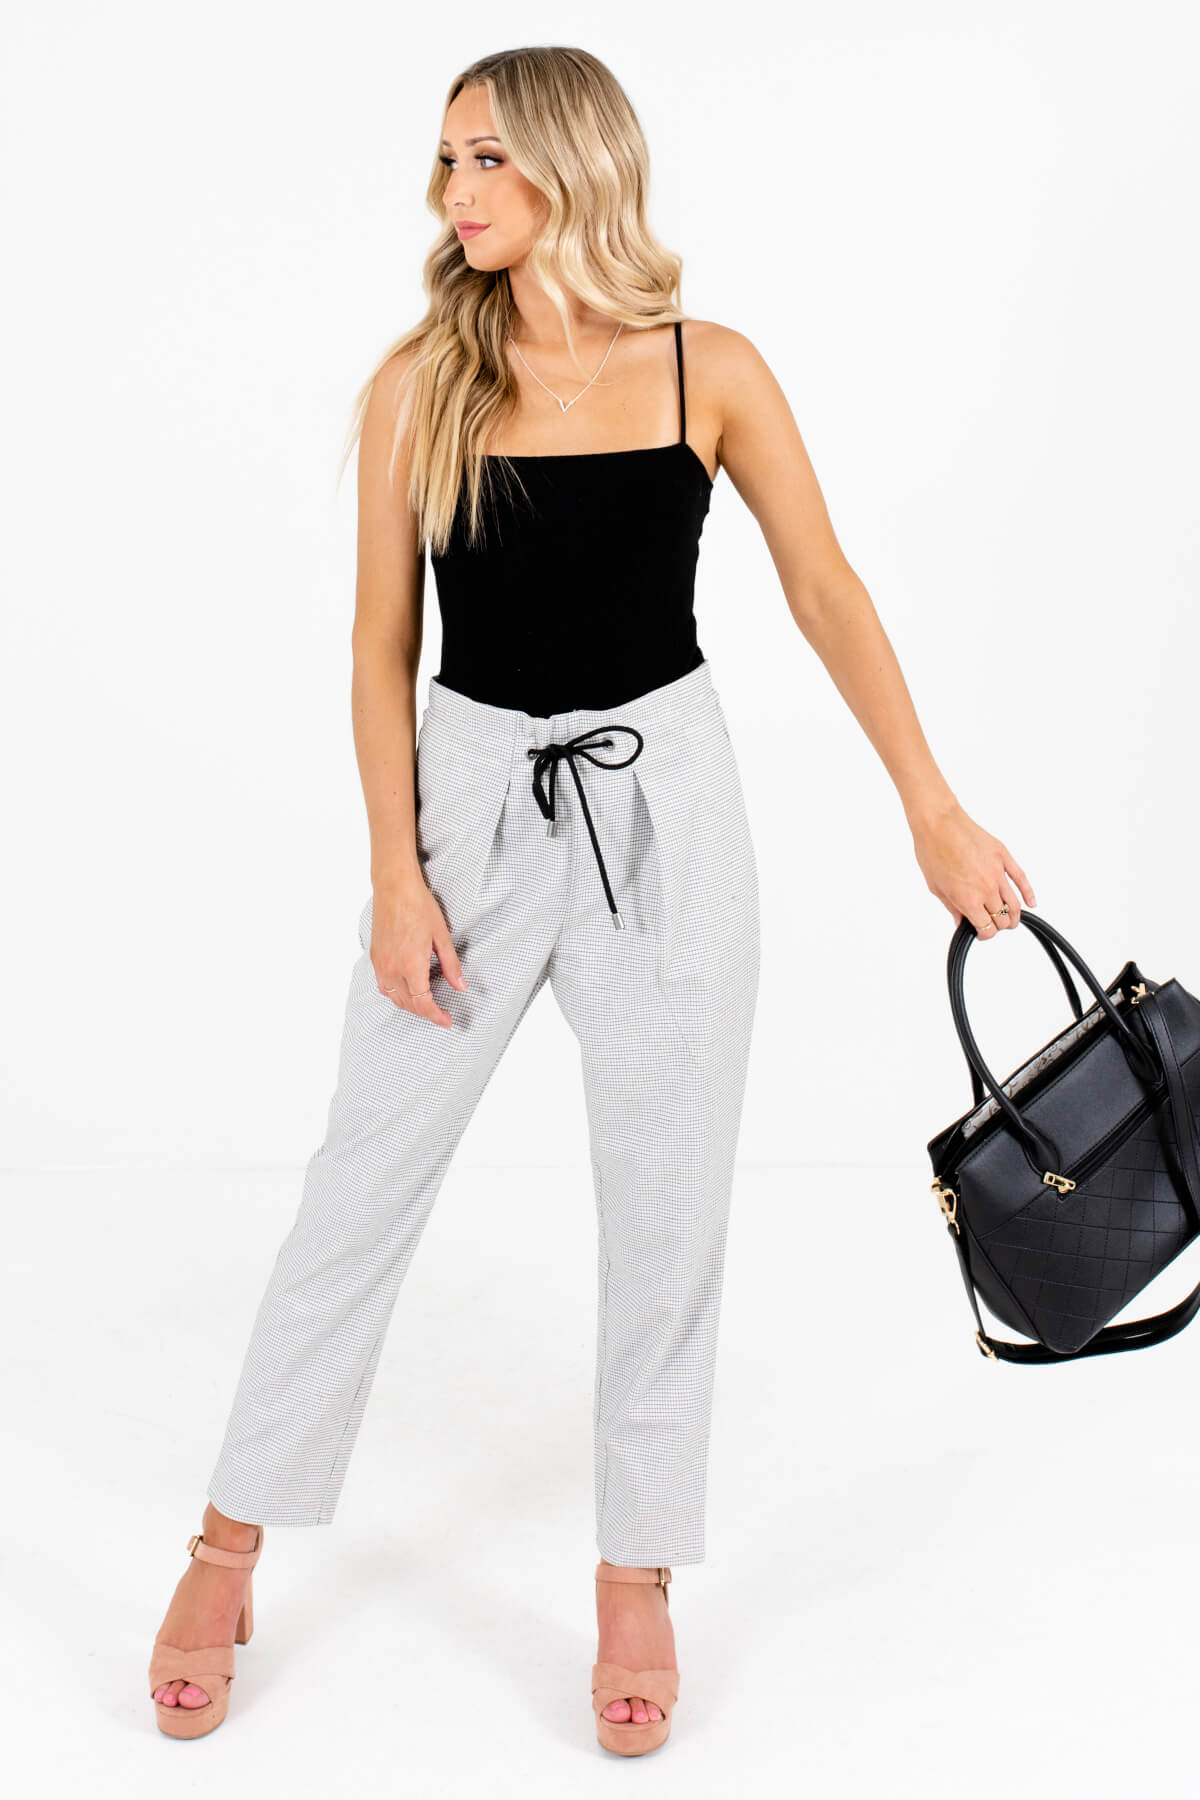 White Cute and Comfortable Boutique Pants for Women